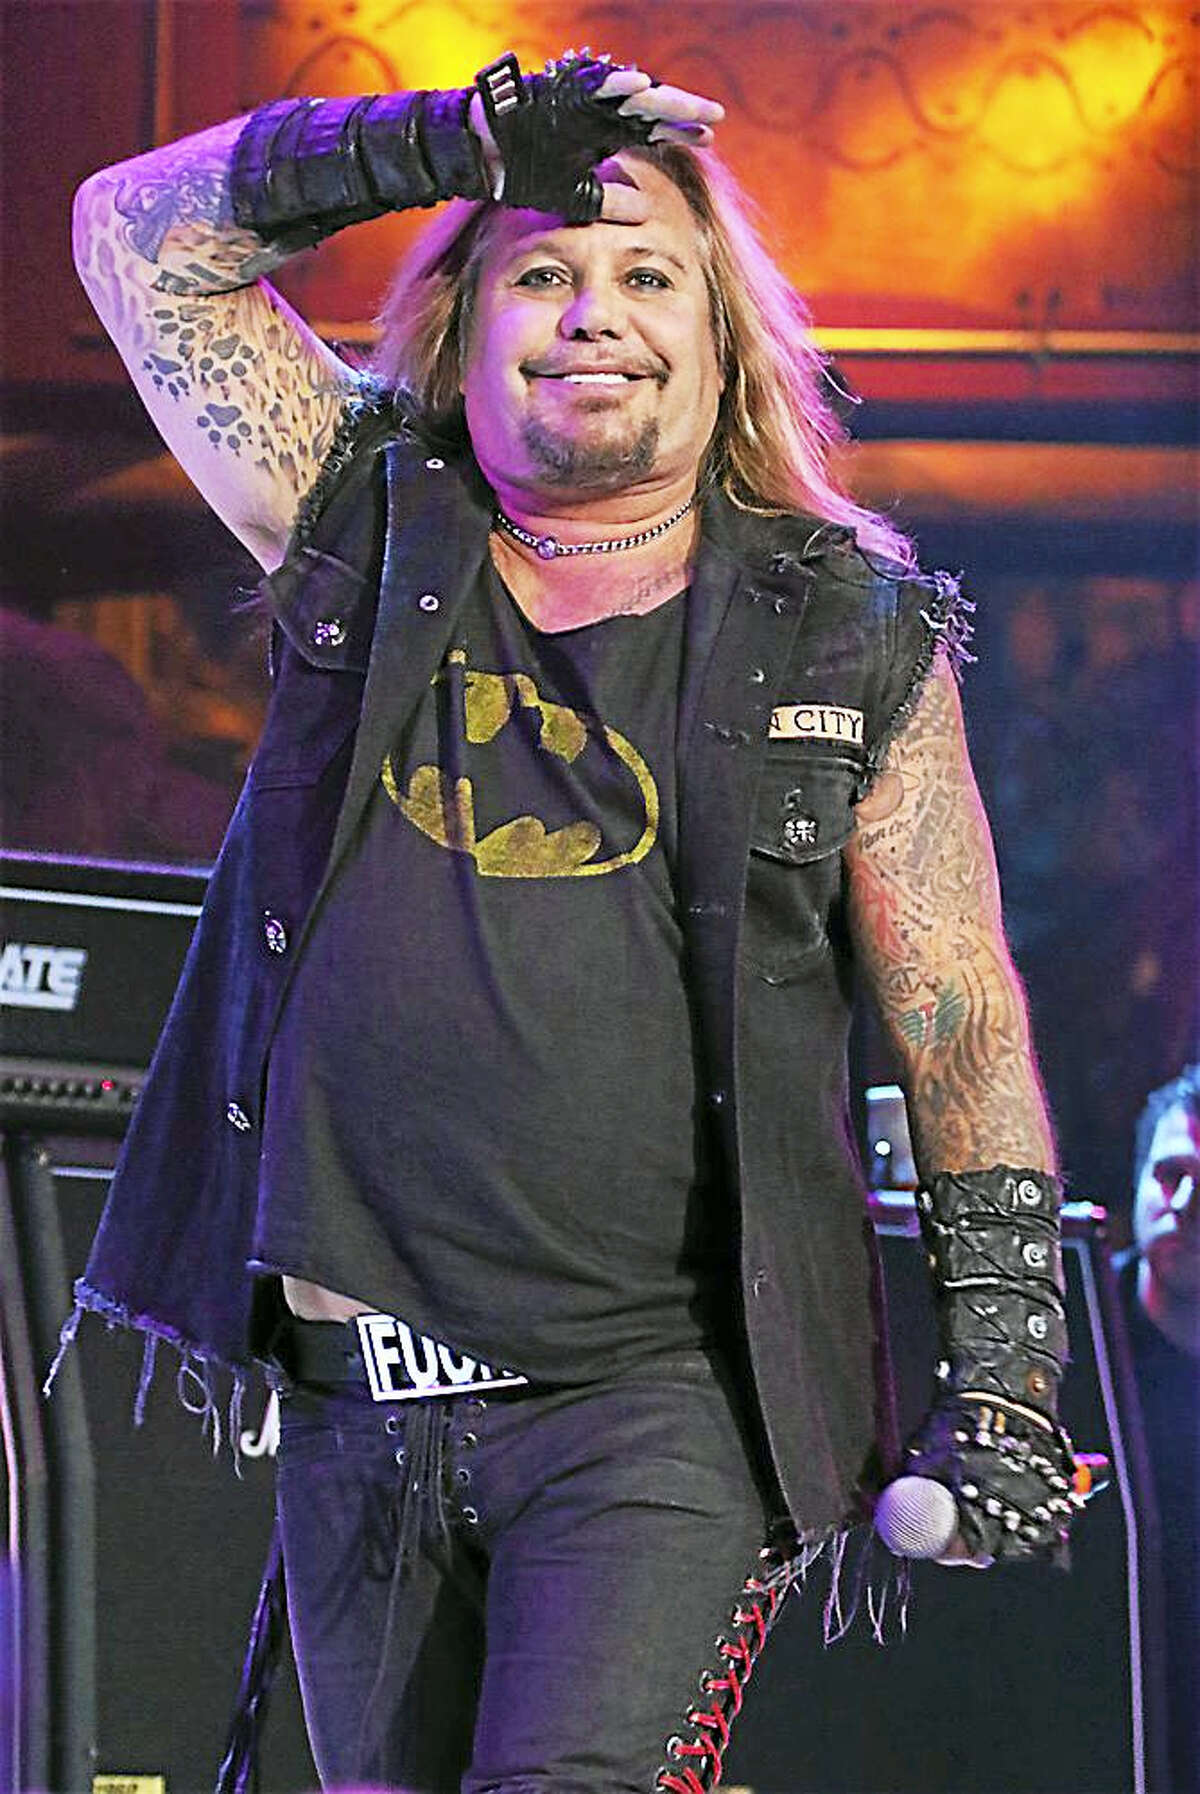 Photo by John Atashian Singer and musician, Vince Neil, best known as the lead vocalist of the heavy metal band Mötley Crüe, looks out at his fans that packed the Wolf Den Lounge inside of the Mohegan Sun Casino on Saturday Jan. 28. The show was a night filled with Motley Crue’s biggest hits that thrilled the large crowd that gathered around the Wolf Den Lounge. For more information on upcoming free performances in the Wolf Den, visit www.mohegansun.com